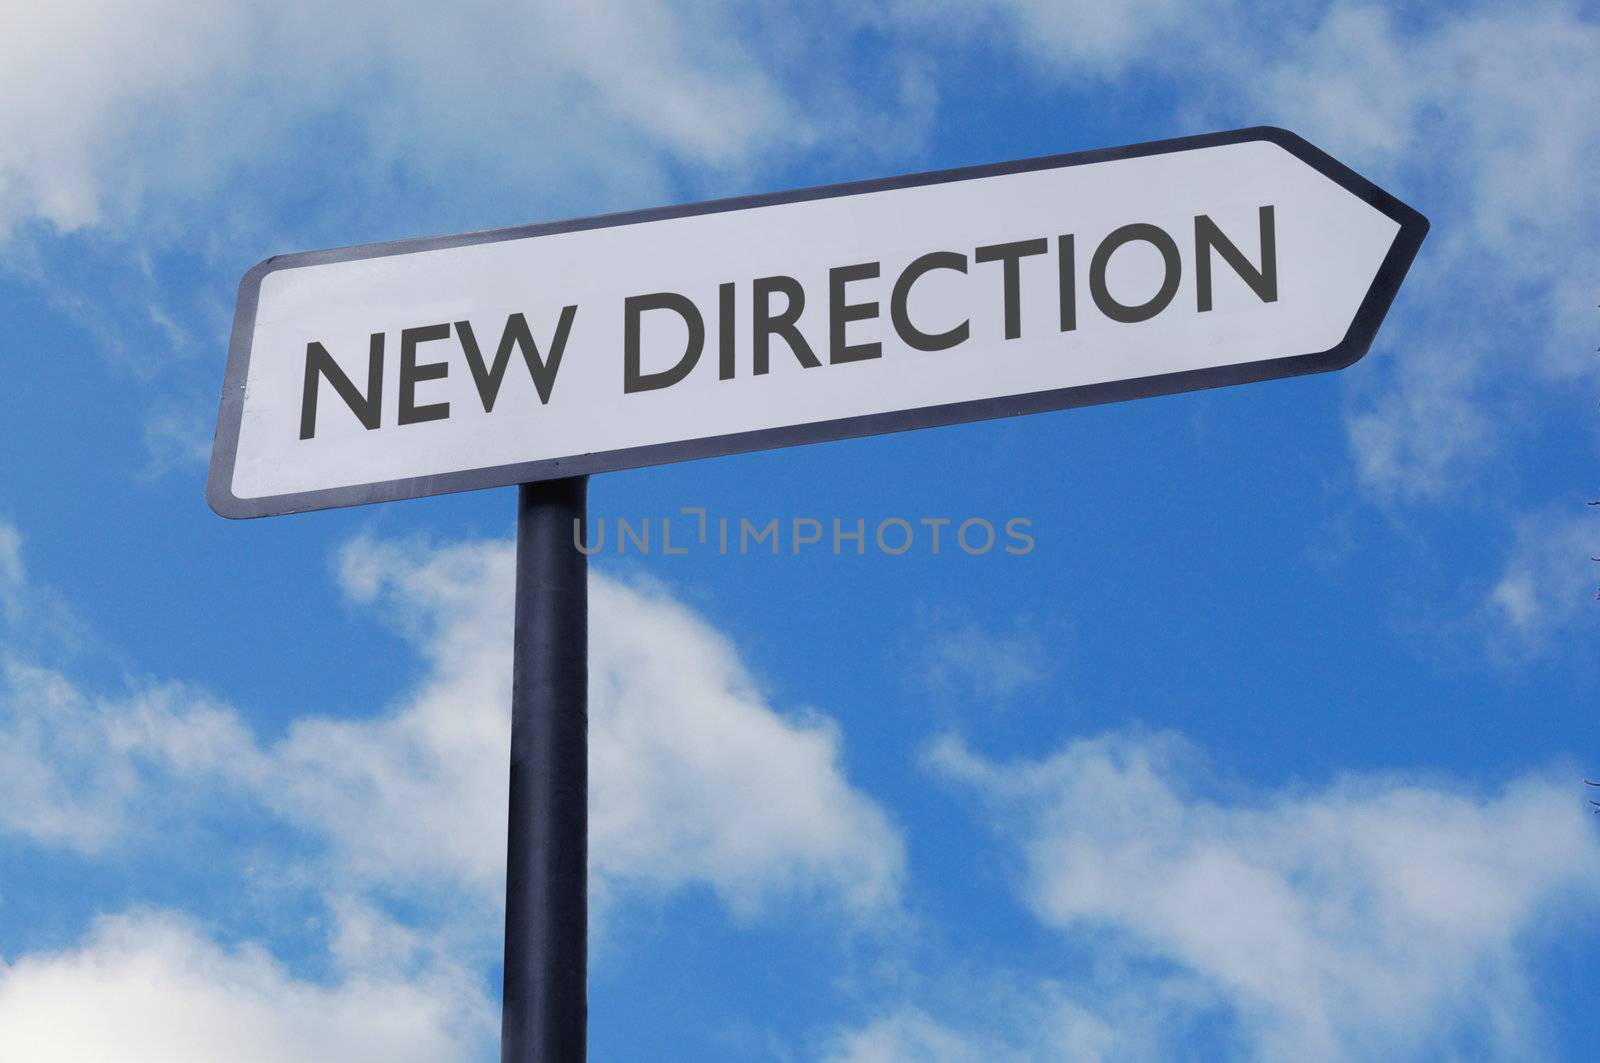 New direction street sign against blue sky